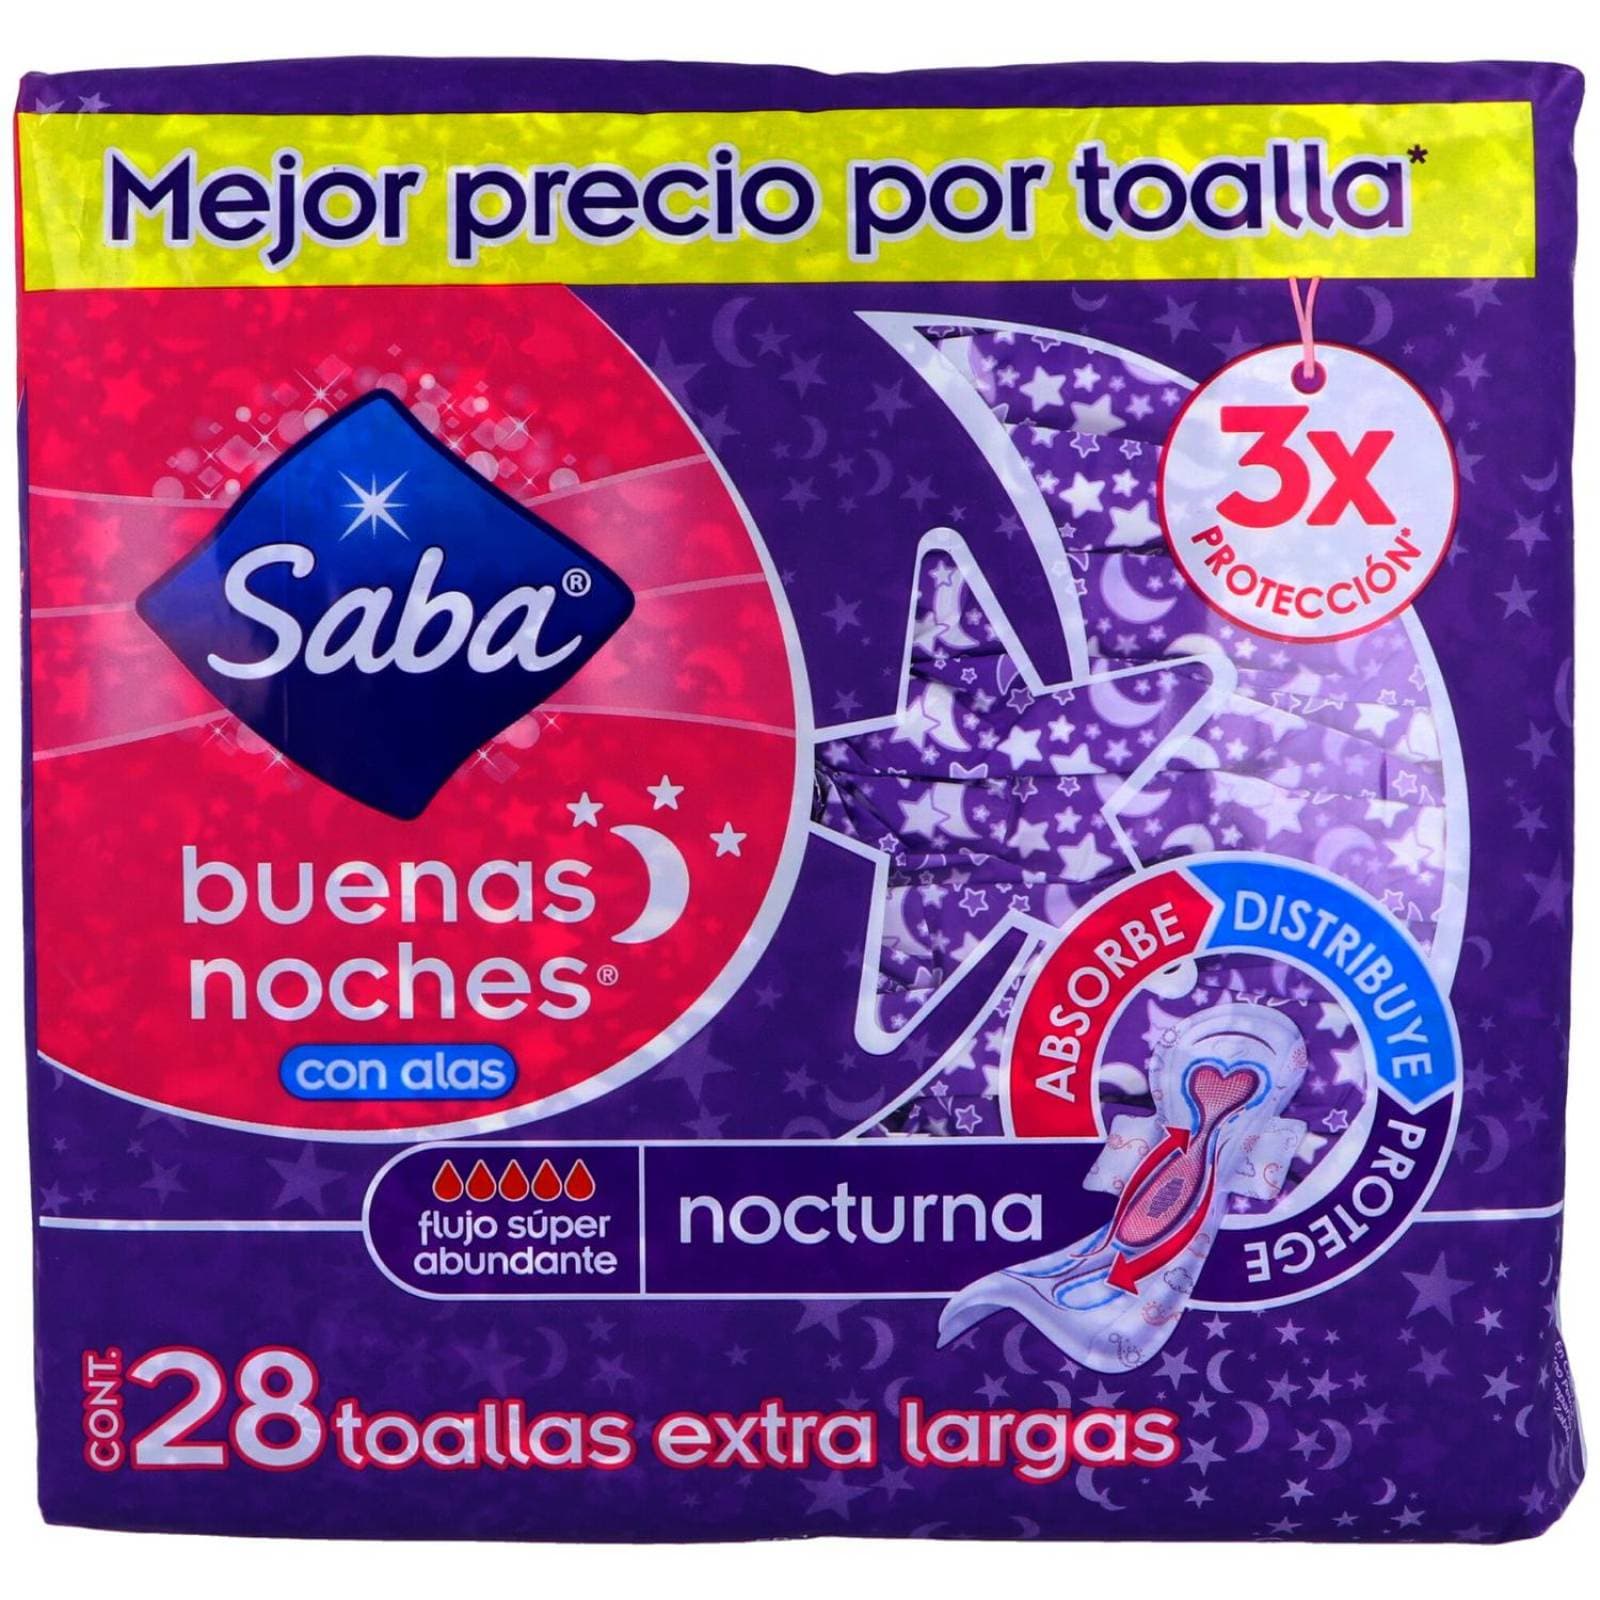 Saba Nocturna Calzon, Buy Now, on Sale, 53% OFF, 